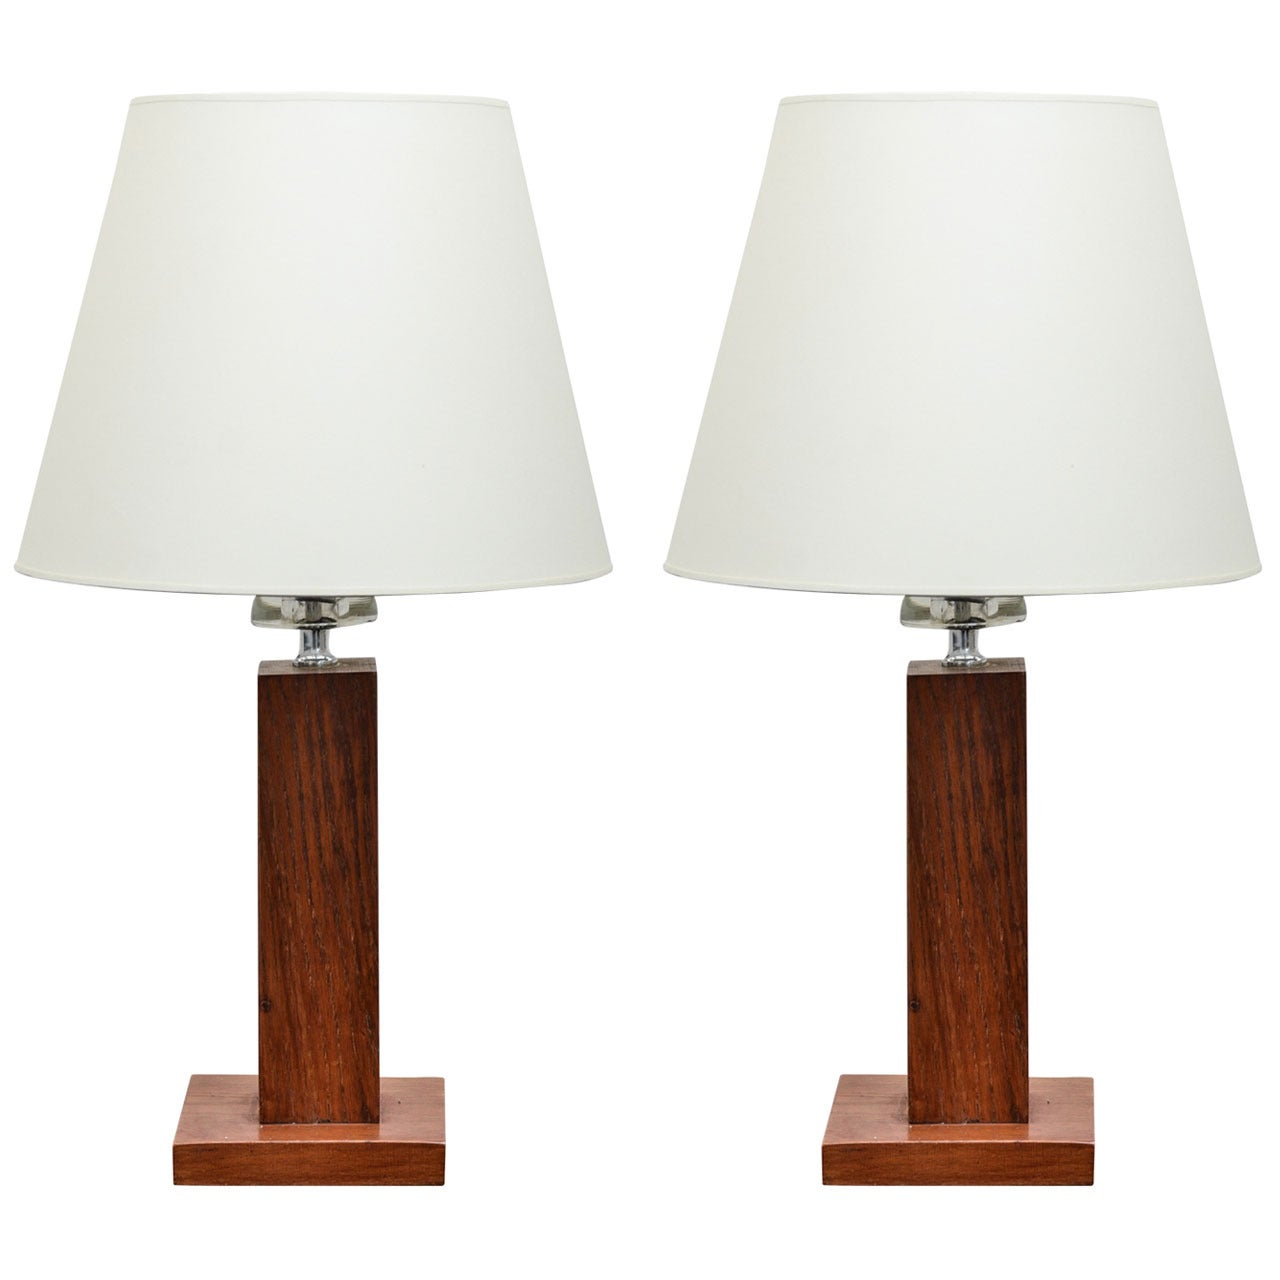 Pair of Square Oak Table Lamps with Half-Moon Glass Detail